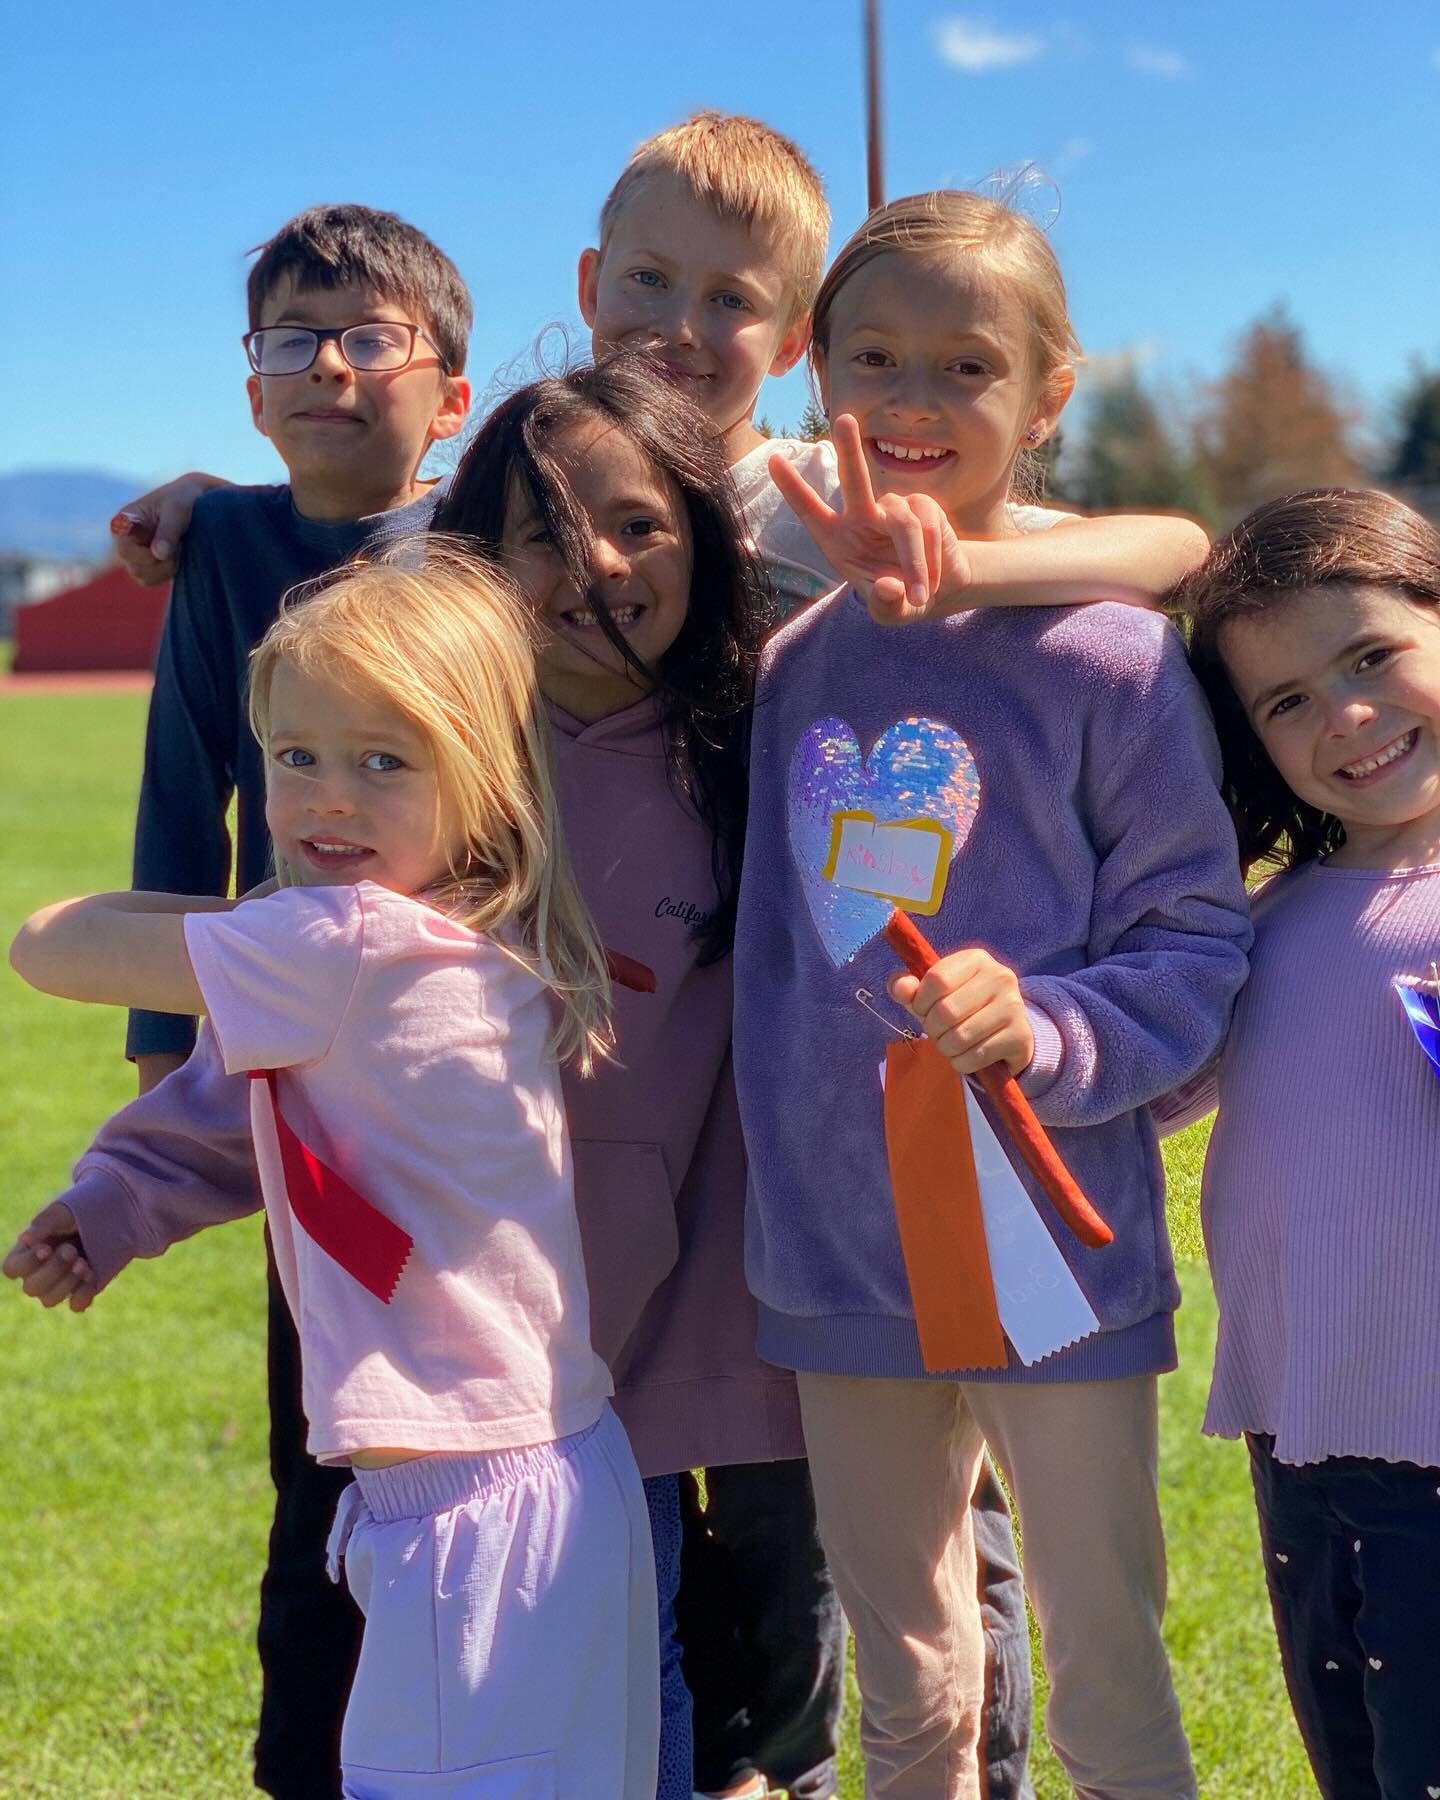 We got to join in on a Track and field day for homeschooling families last week and it was amazing! Kids getting to try new sports (ahem* shotput!) and racing against other kids in the same grades. There are so many opportunities to join in on for ho